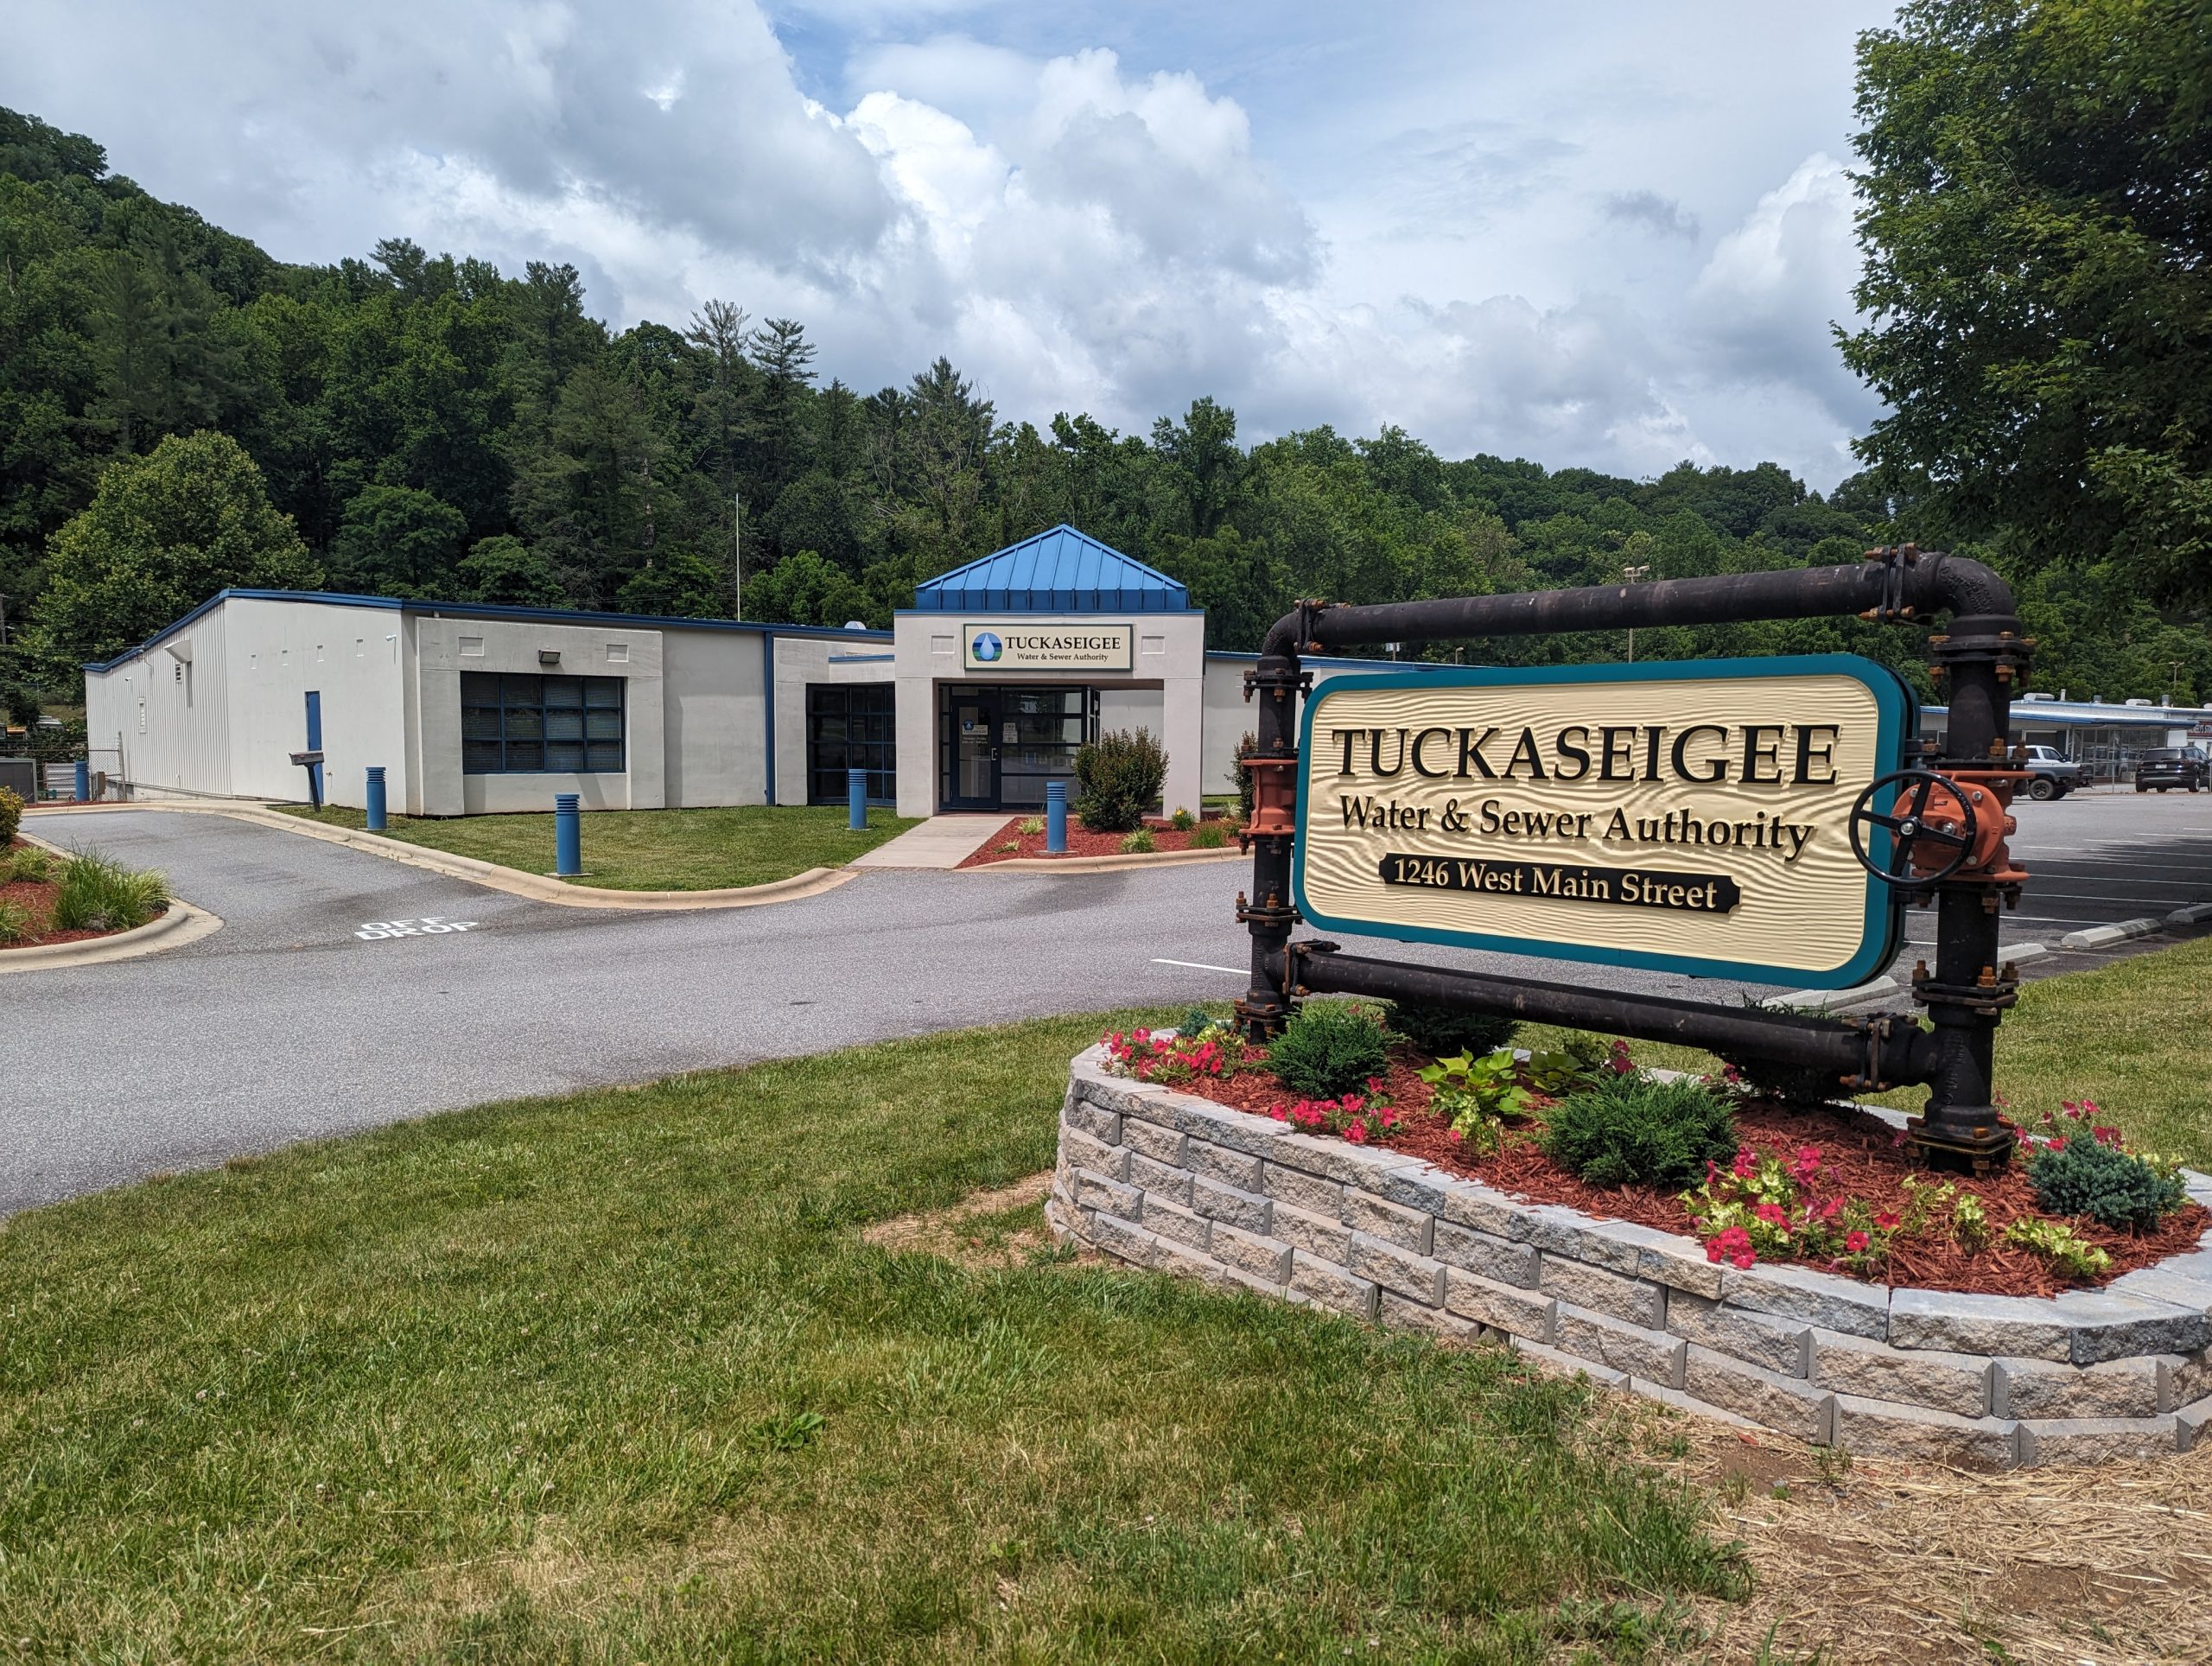 Picture of the Tuckaseigee Water and Sewer Authority building